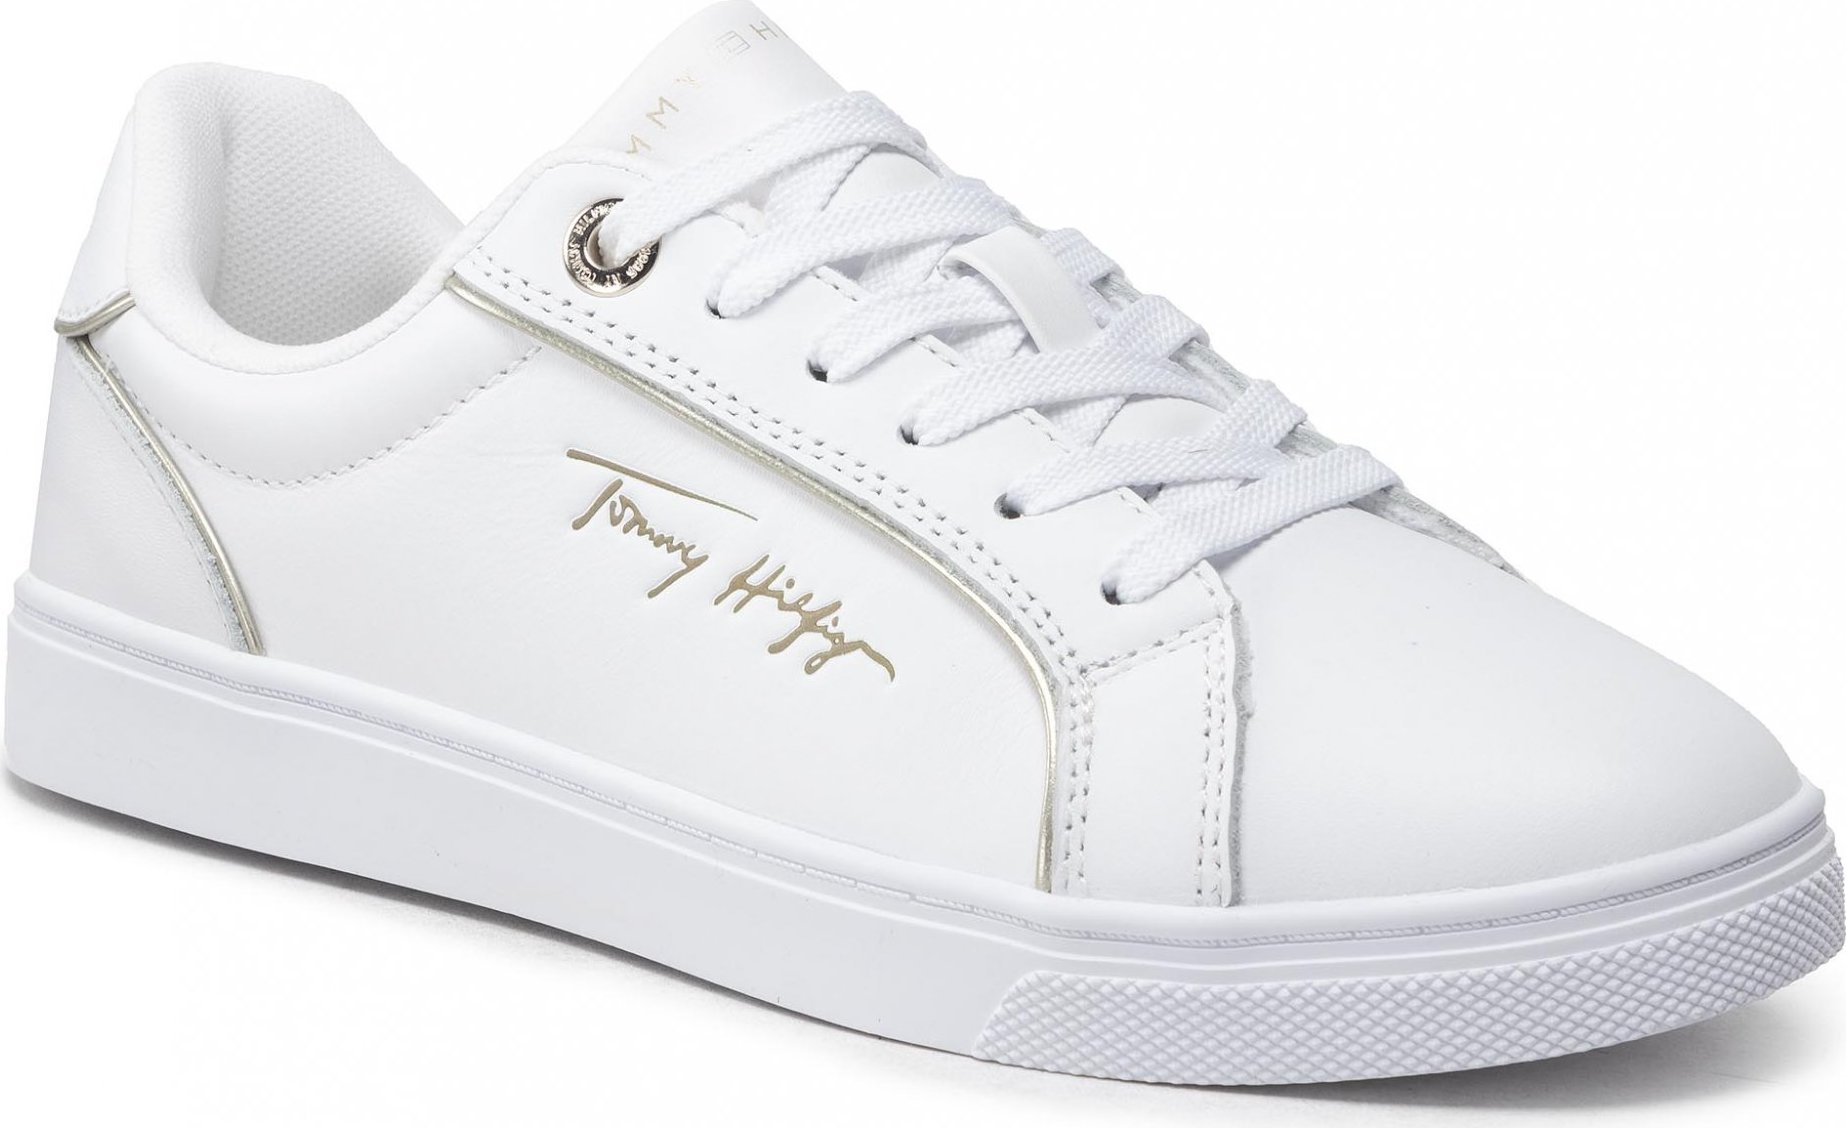 TOMMY HILFIGER Signature Piping Sneaker FW0FW06869